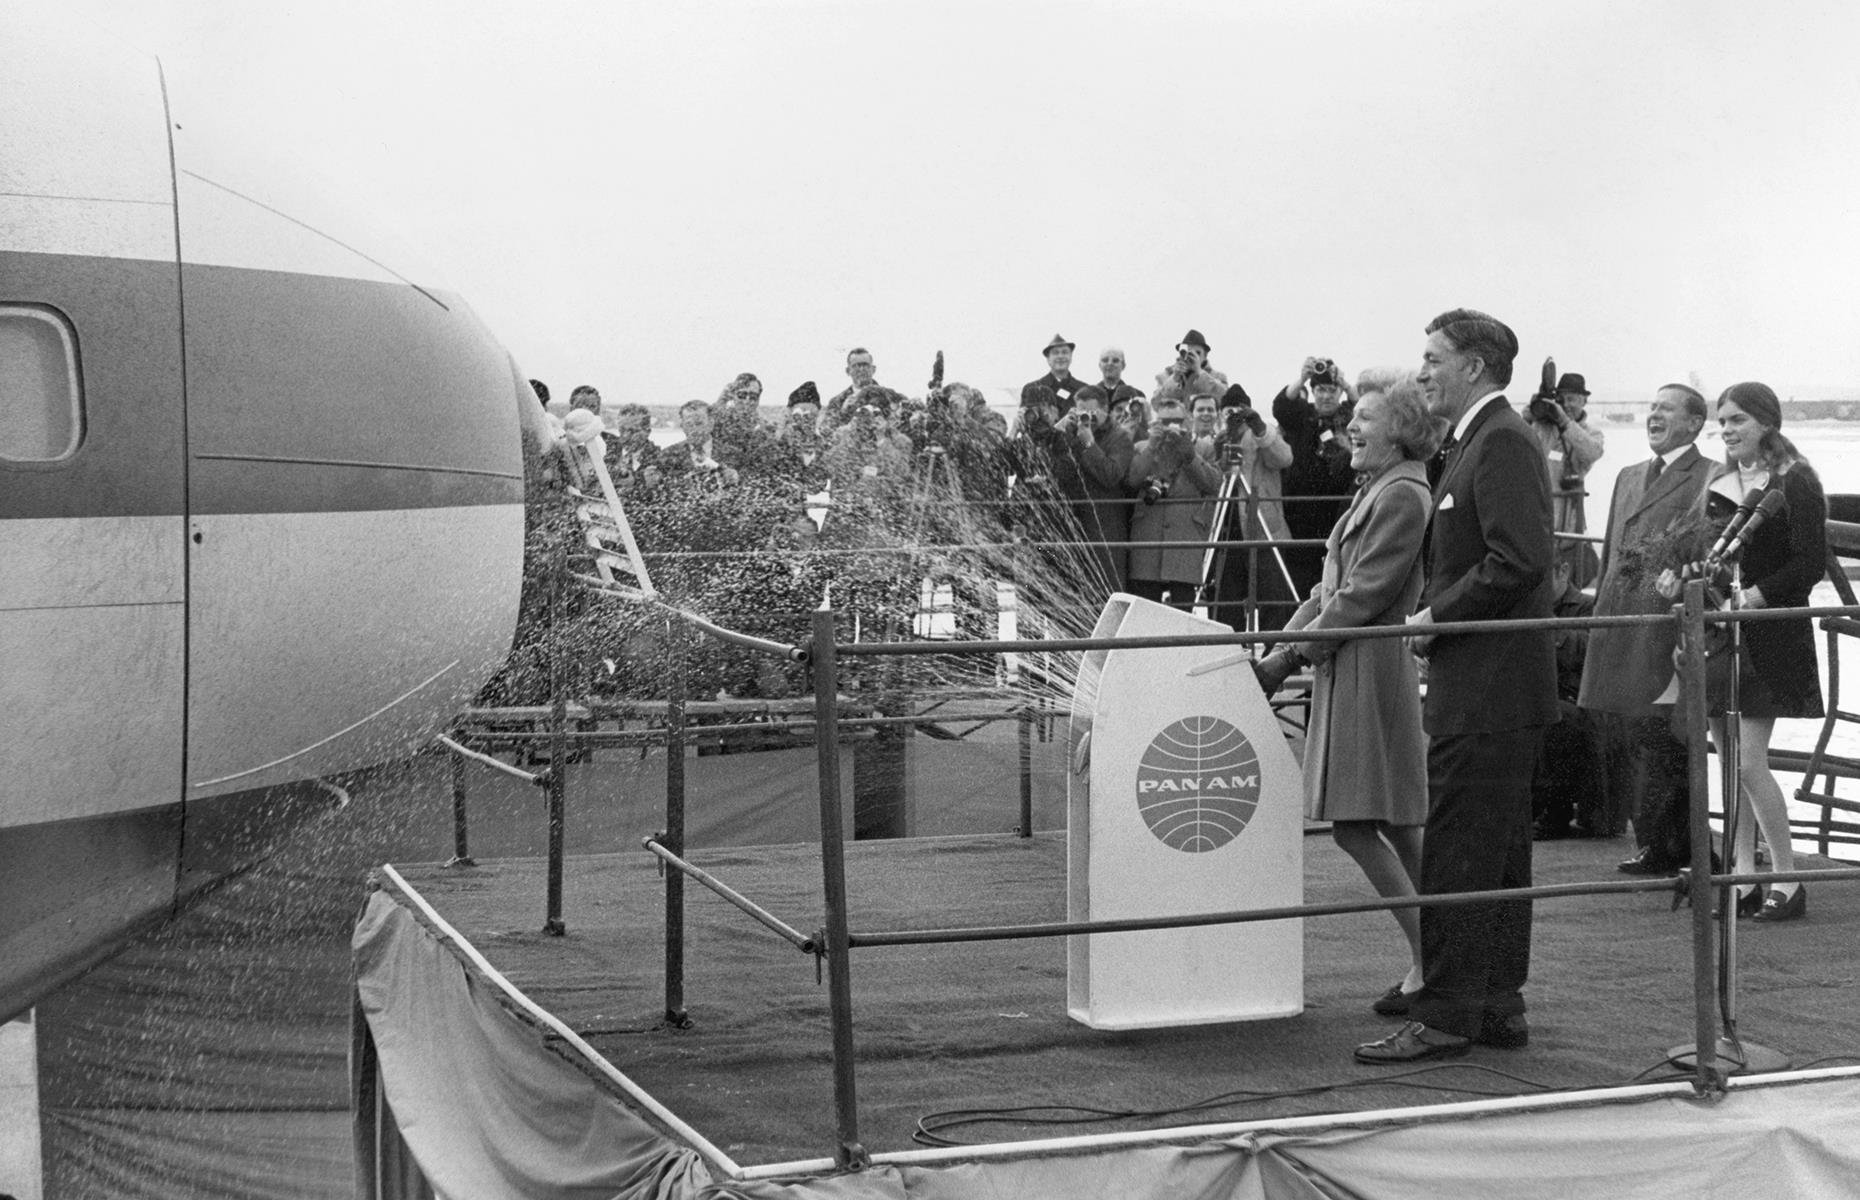 Another major leap for commercial air travel in this decade came with the introduction of the Boeing 747, a wide-bodied jet aircraft able to carry many more passengers than its predecessors. Here, the American First Lady Patricia Nixon sprays Champagne onto the aircraft ahead of its maiden commercial flight from New York to London in service with Pan Am in January 1970.